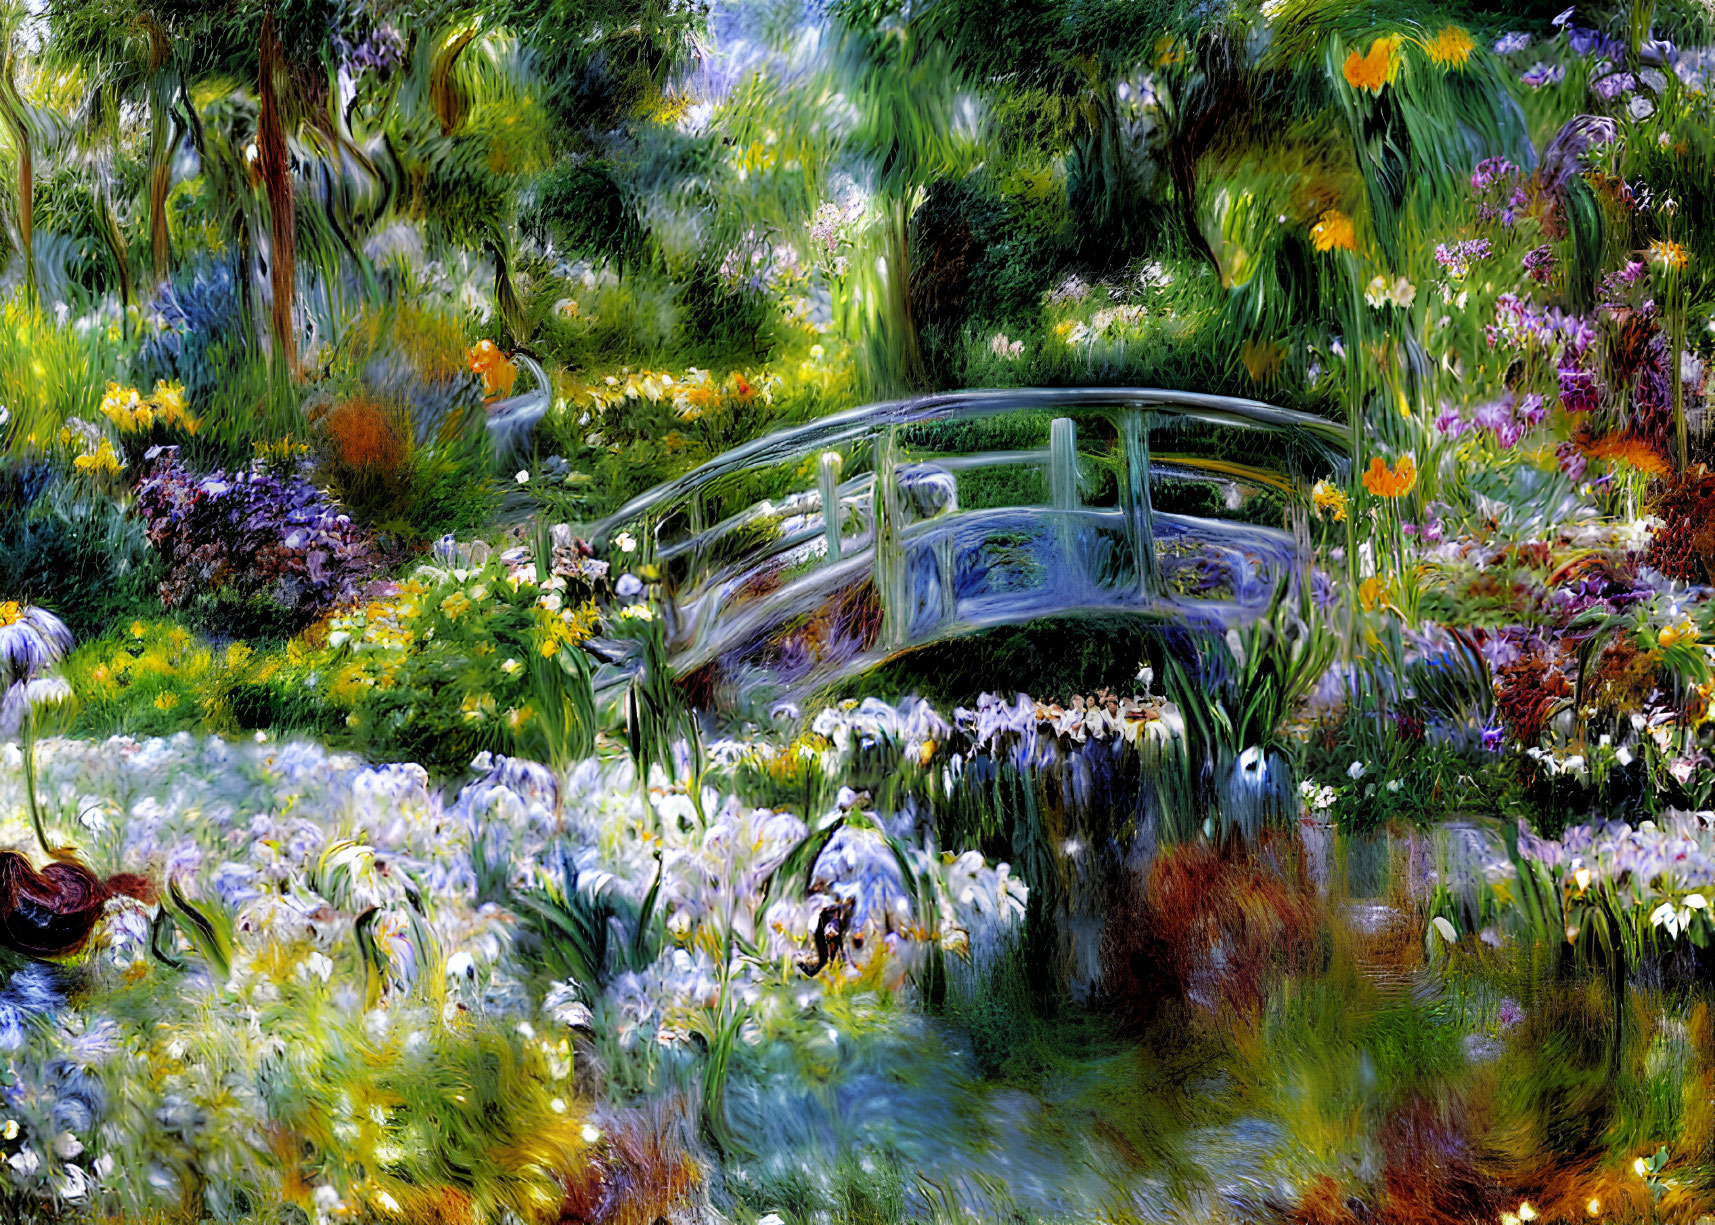 Vibrant flower garden with tranquil pond and wooden bridge